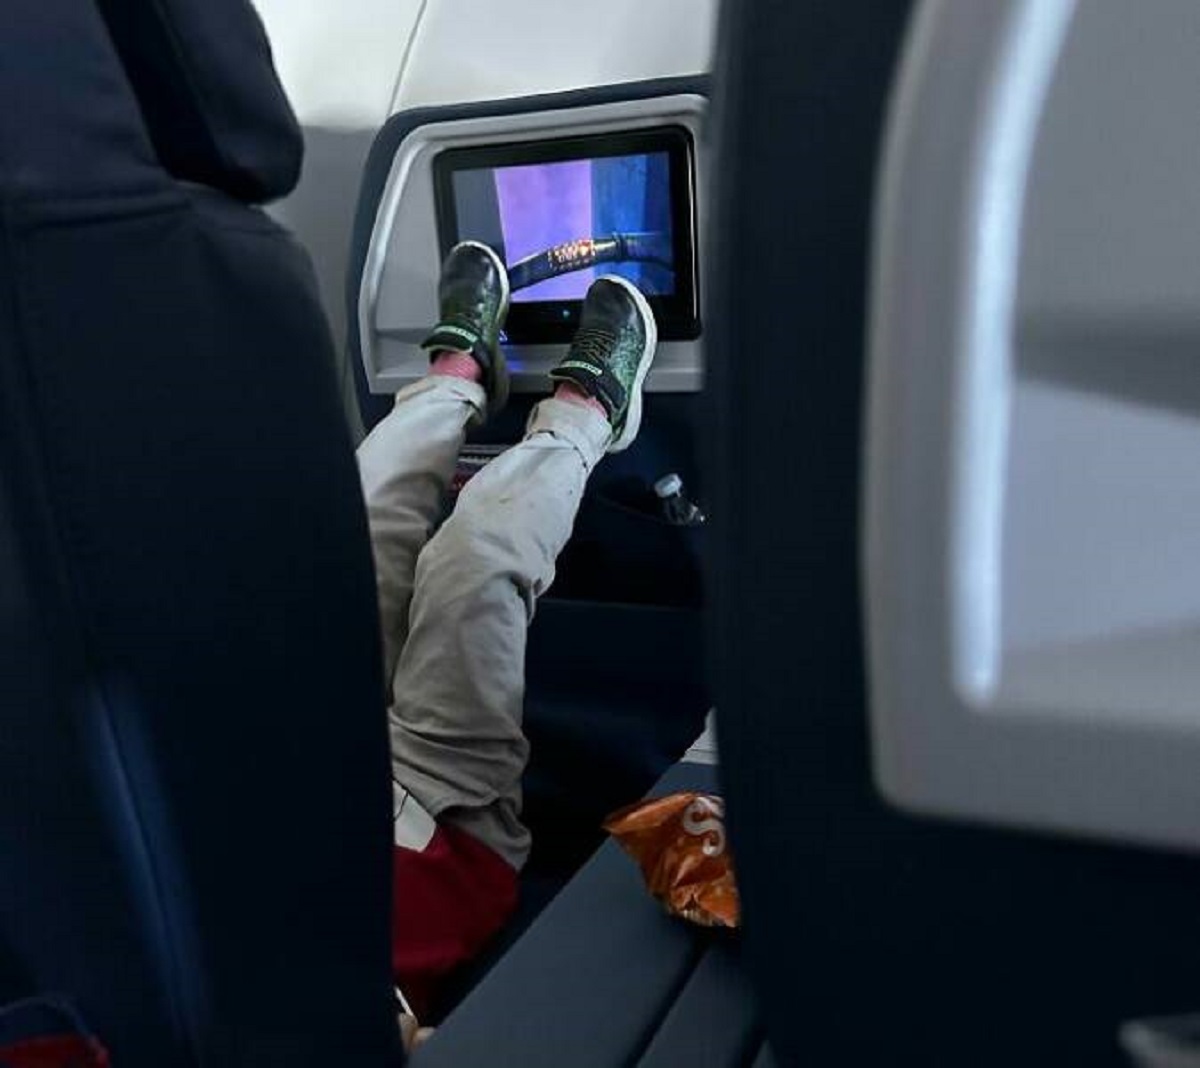 "Either This Or Jumping Out Of His Seat The Whole Flight"